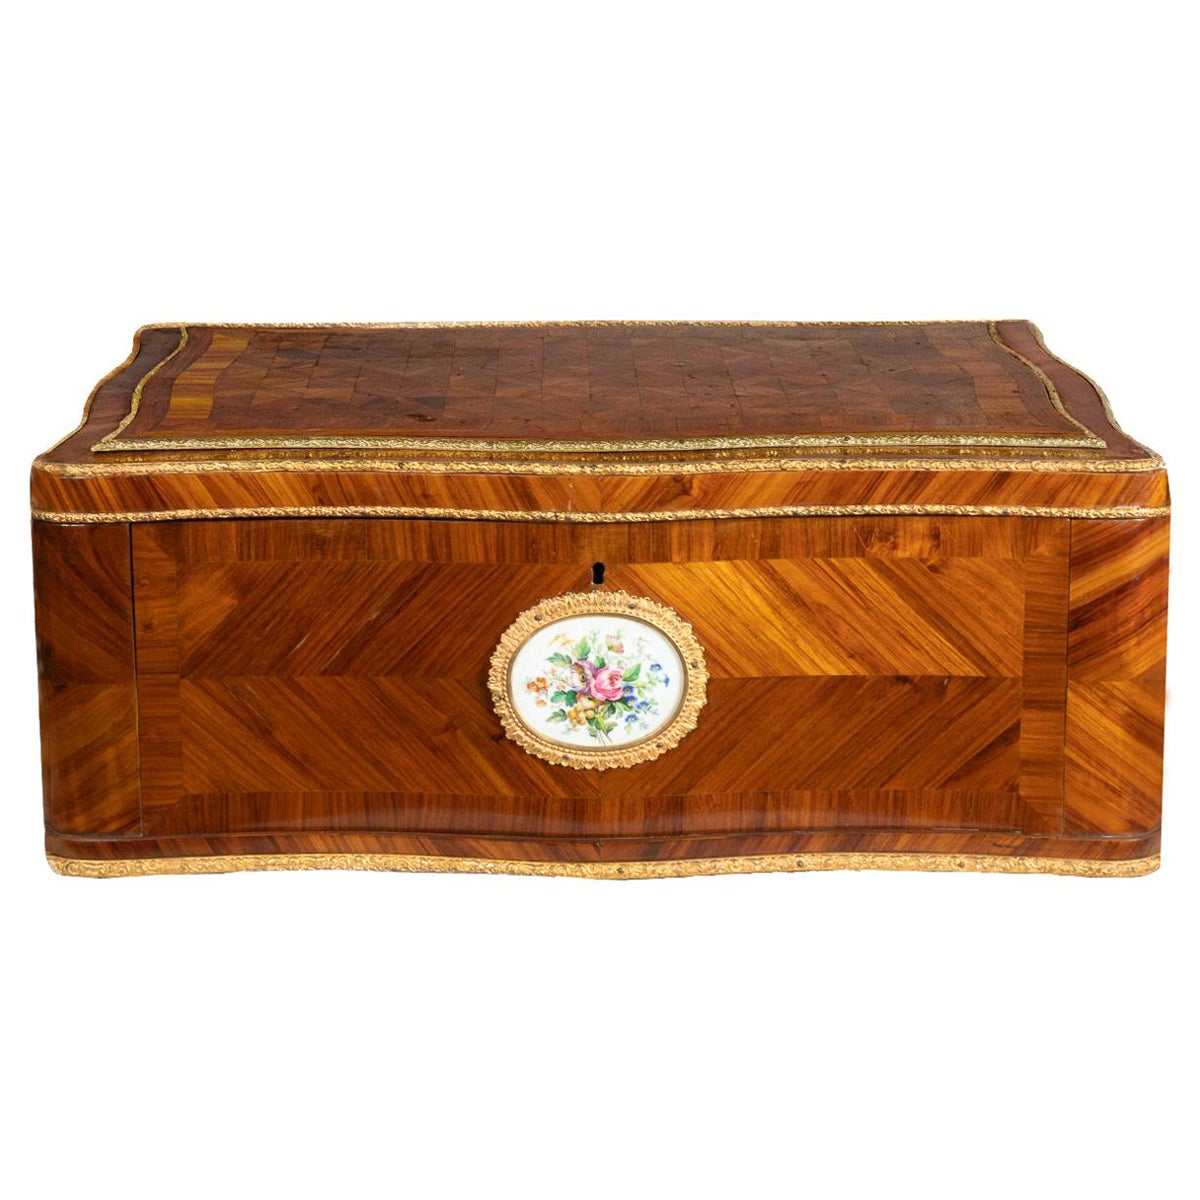 A Louis XVI rosewood chest period toilet box with Sevres porcelain encrusted in gilt bronze hardware.
A interior large mirror and a vast space of small chest drawers for the most complete toilet gentleman or lady.
